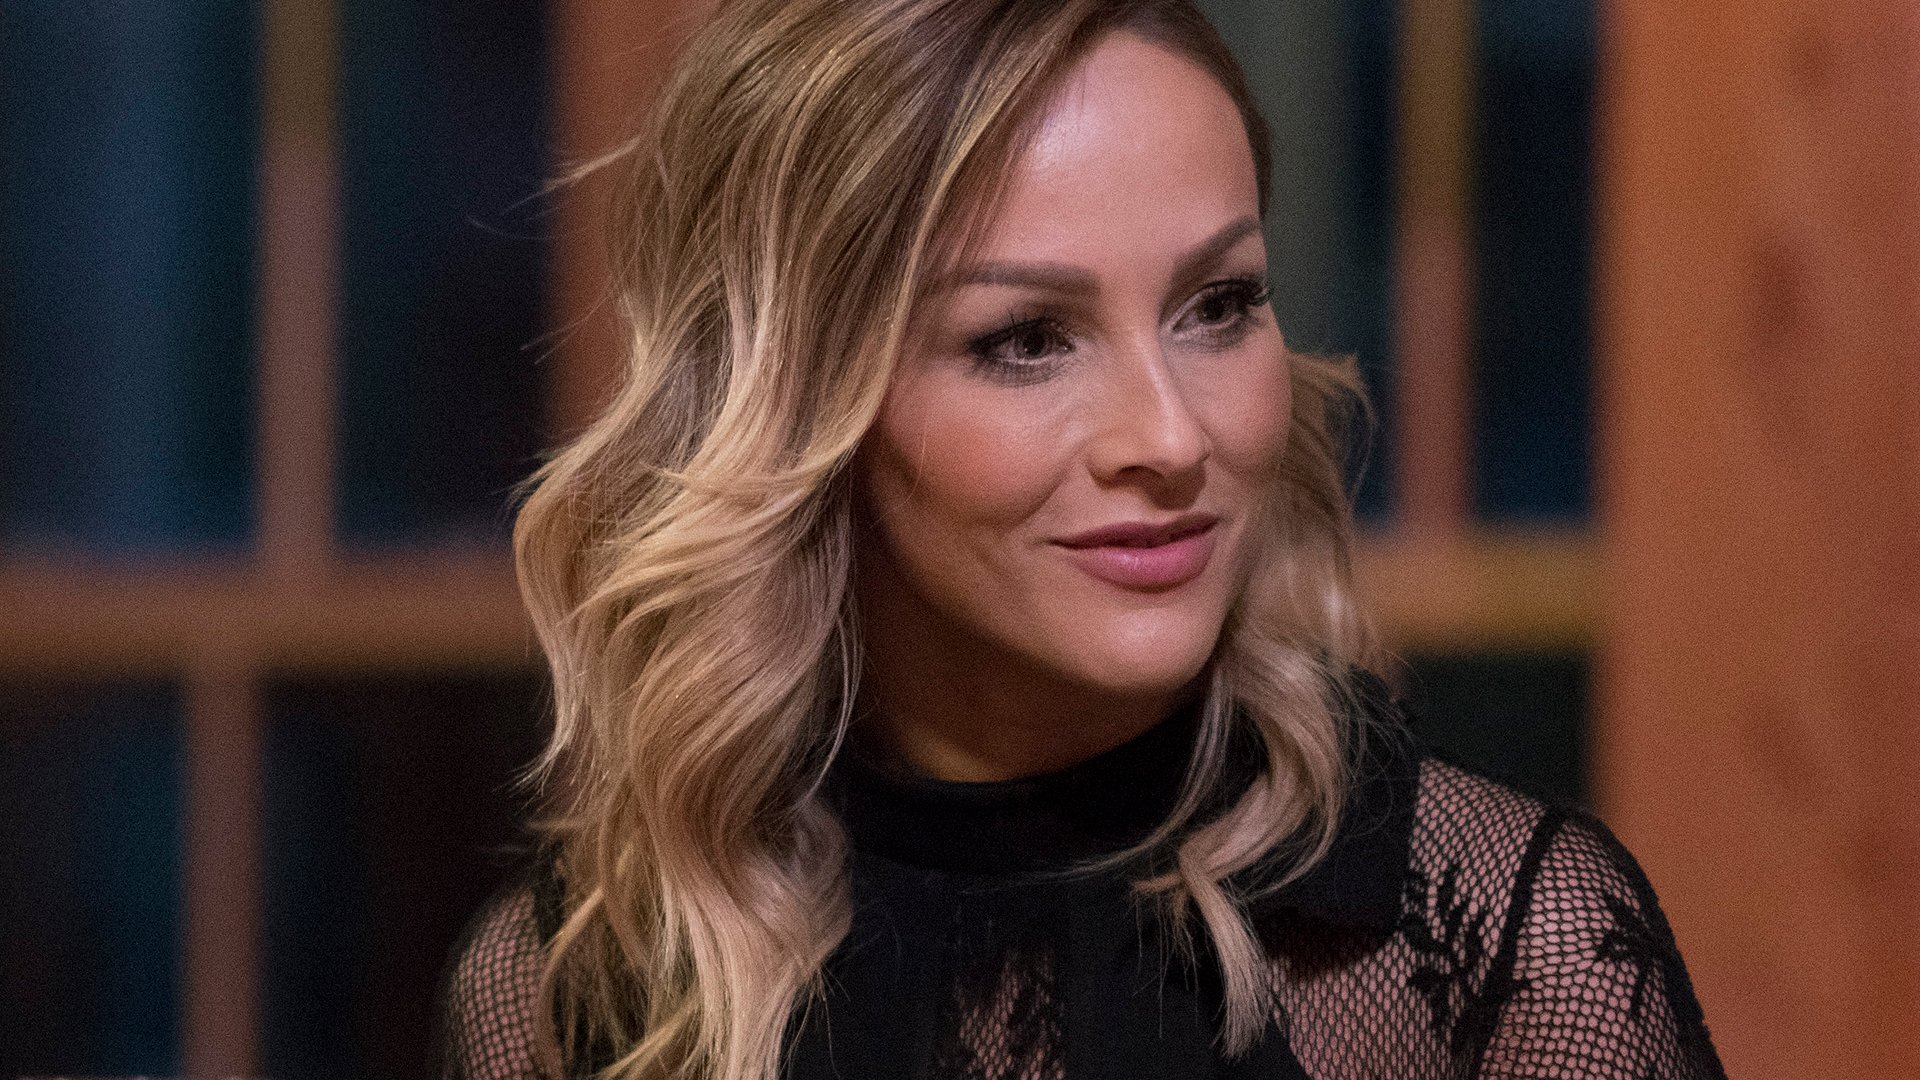 ‘The Bachelorette’: Clare Crawley Has Something to Say About Ending Up Alone After the Show